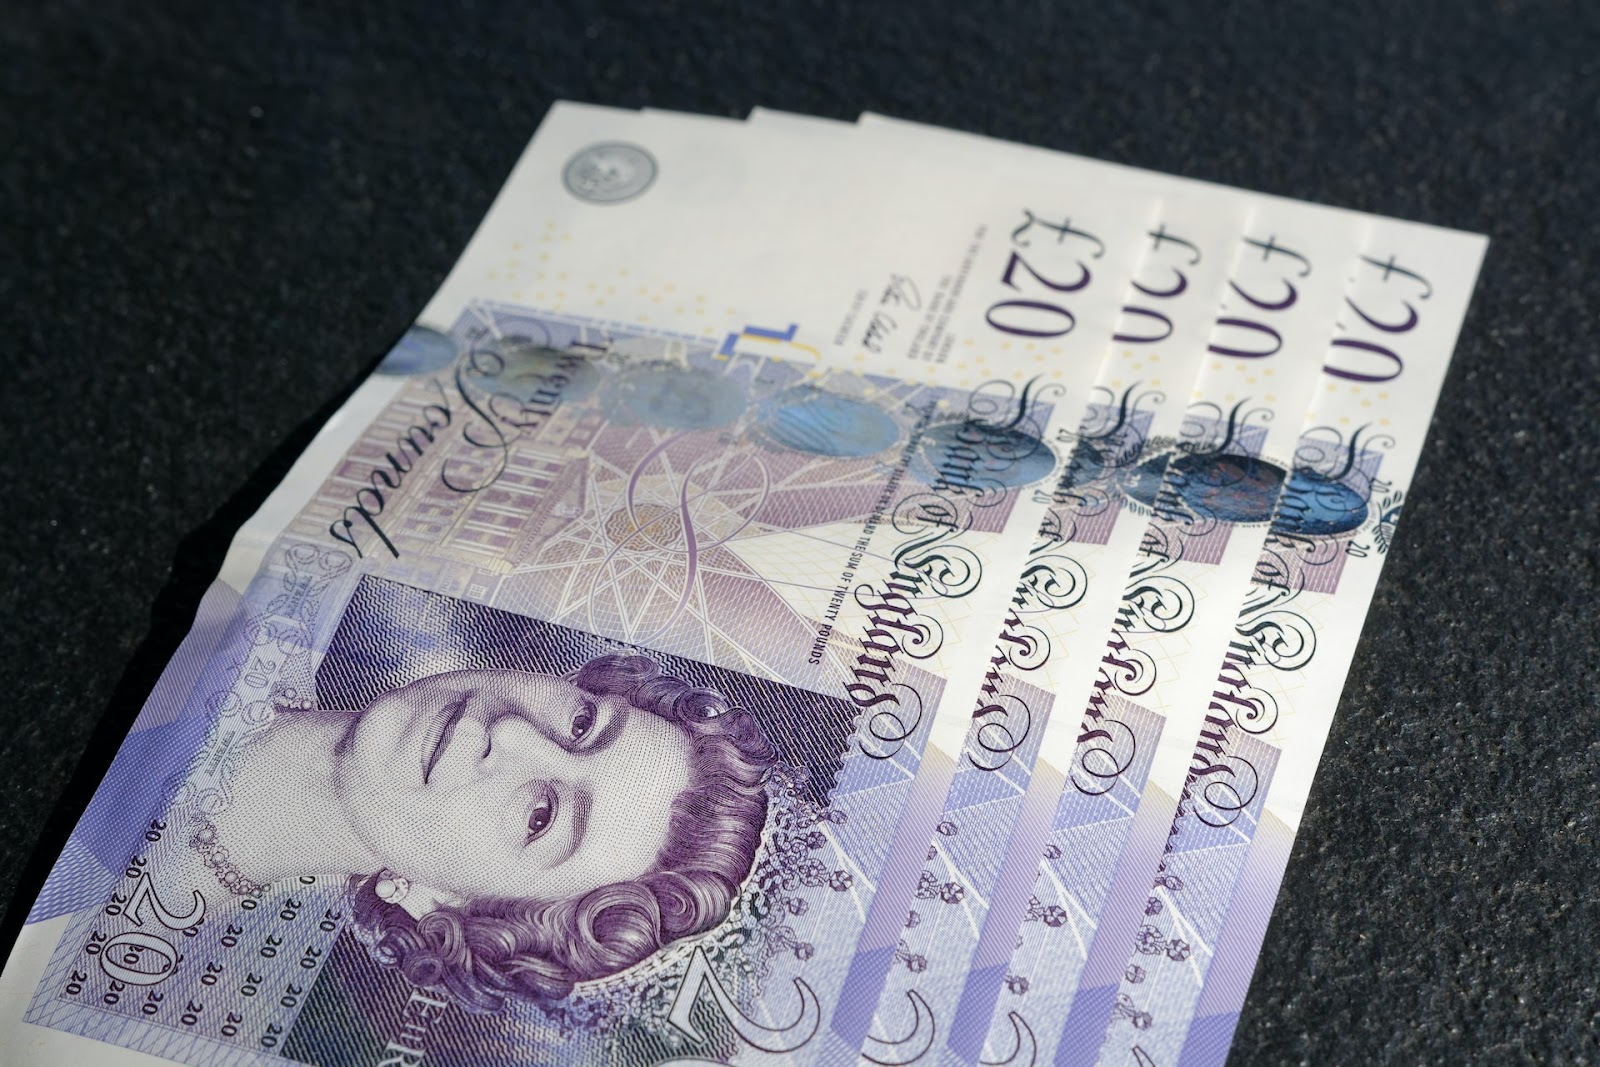 A row of £20 notes